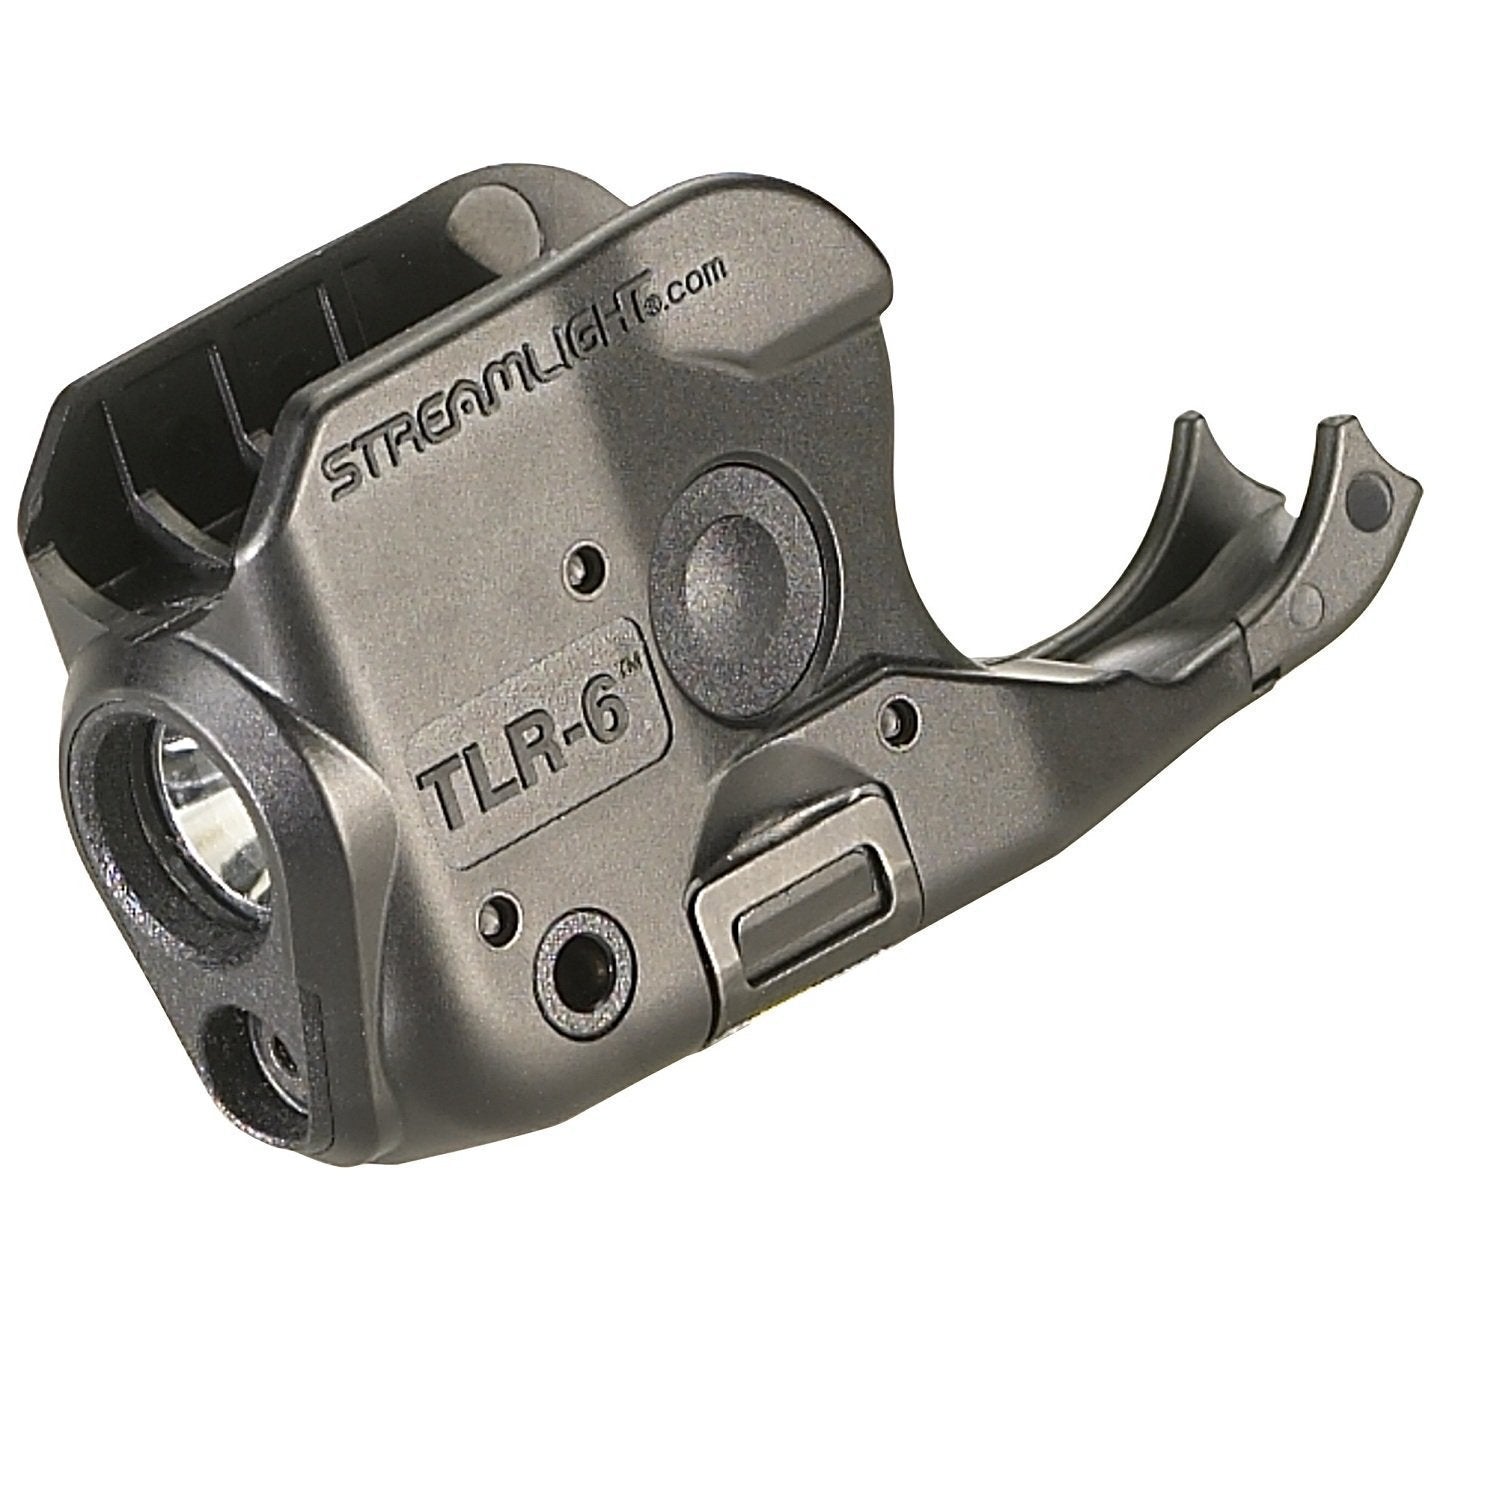 Streamlight TLR-6 for SIG P238/P938 100-Lumens with Red Laser Tactical Weapon Light Tactical Distributors Ltd New Zealand